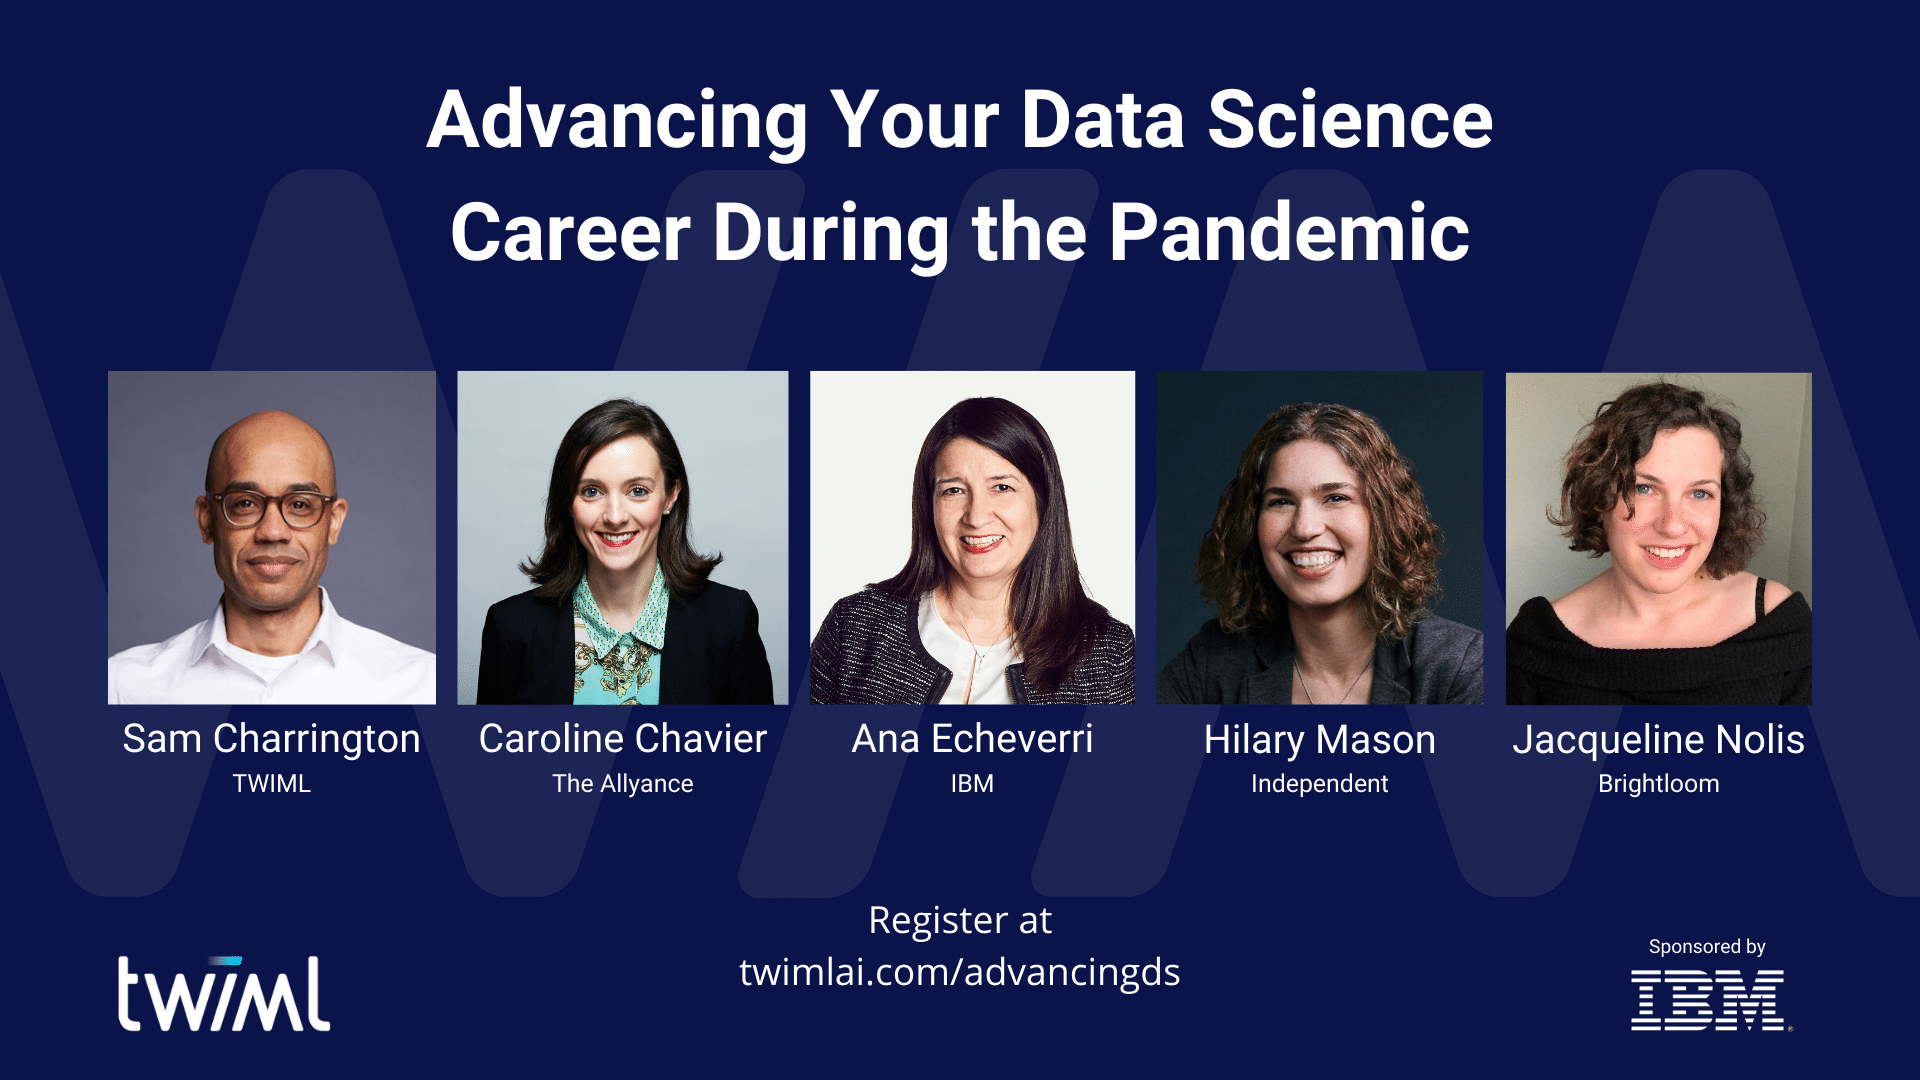 Banner Image: Advancing Your Data Science Career During the Pandemic - Podcast Discussion